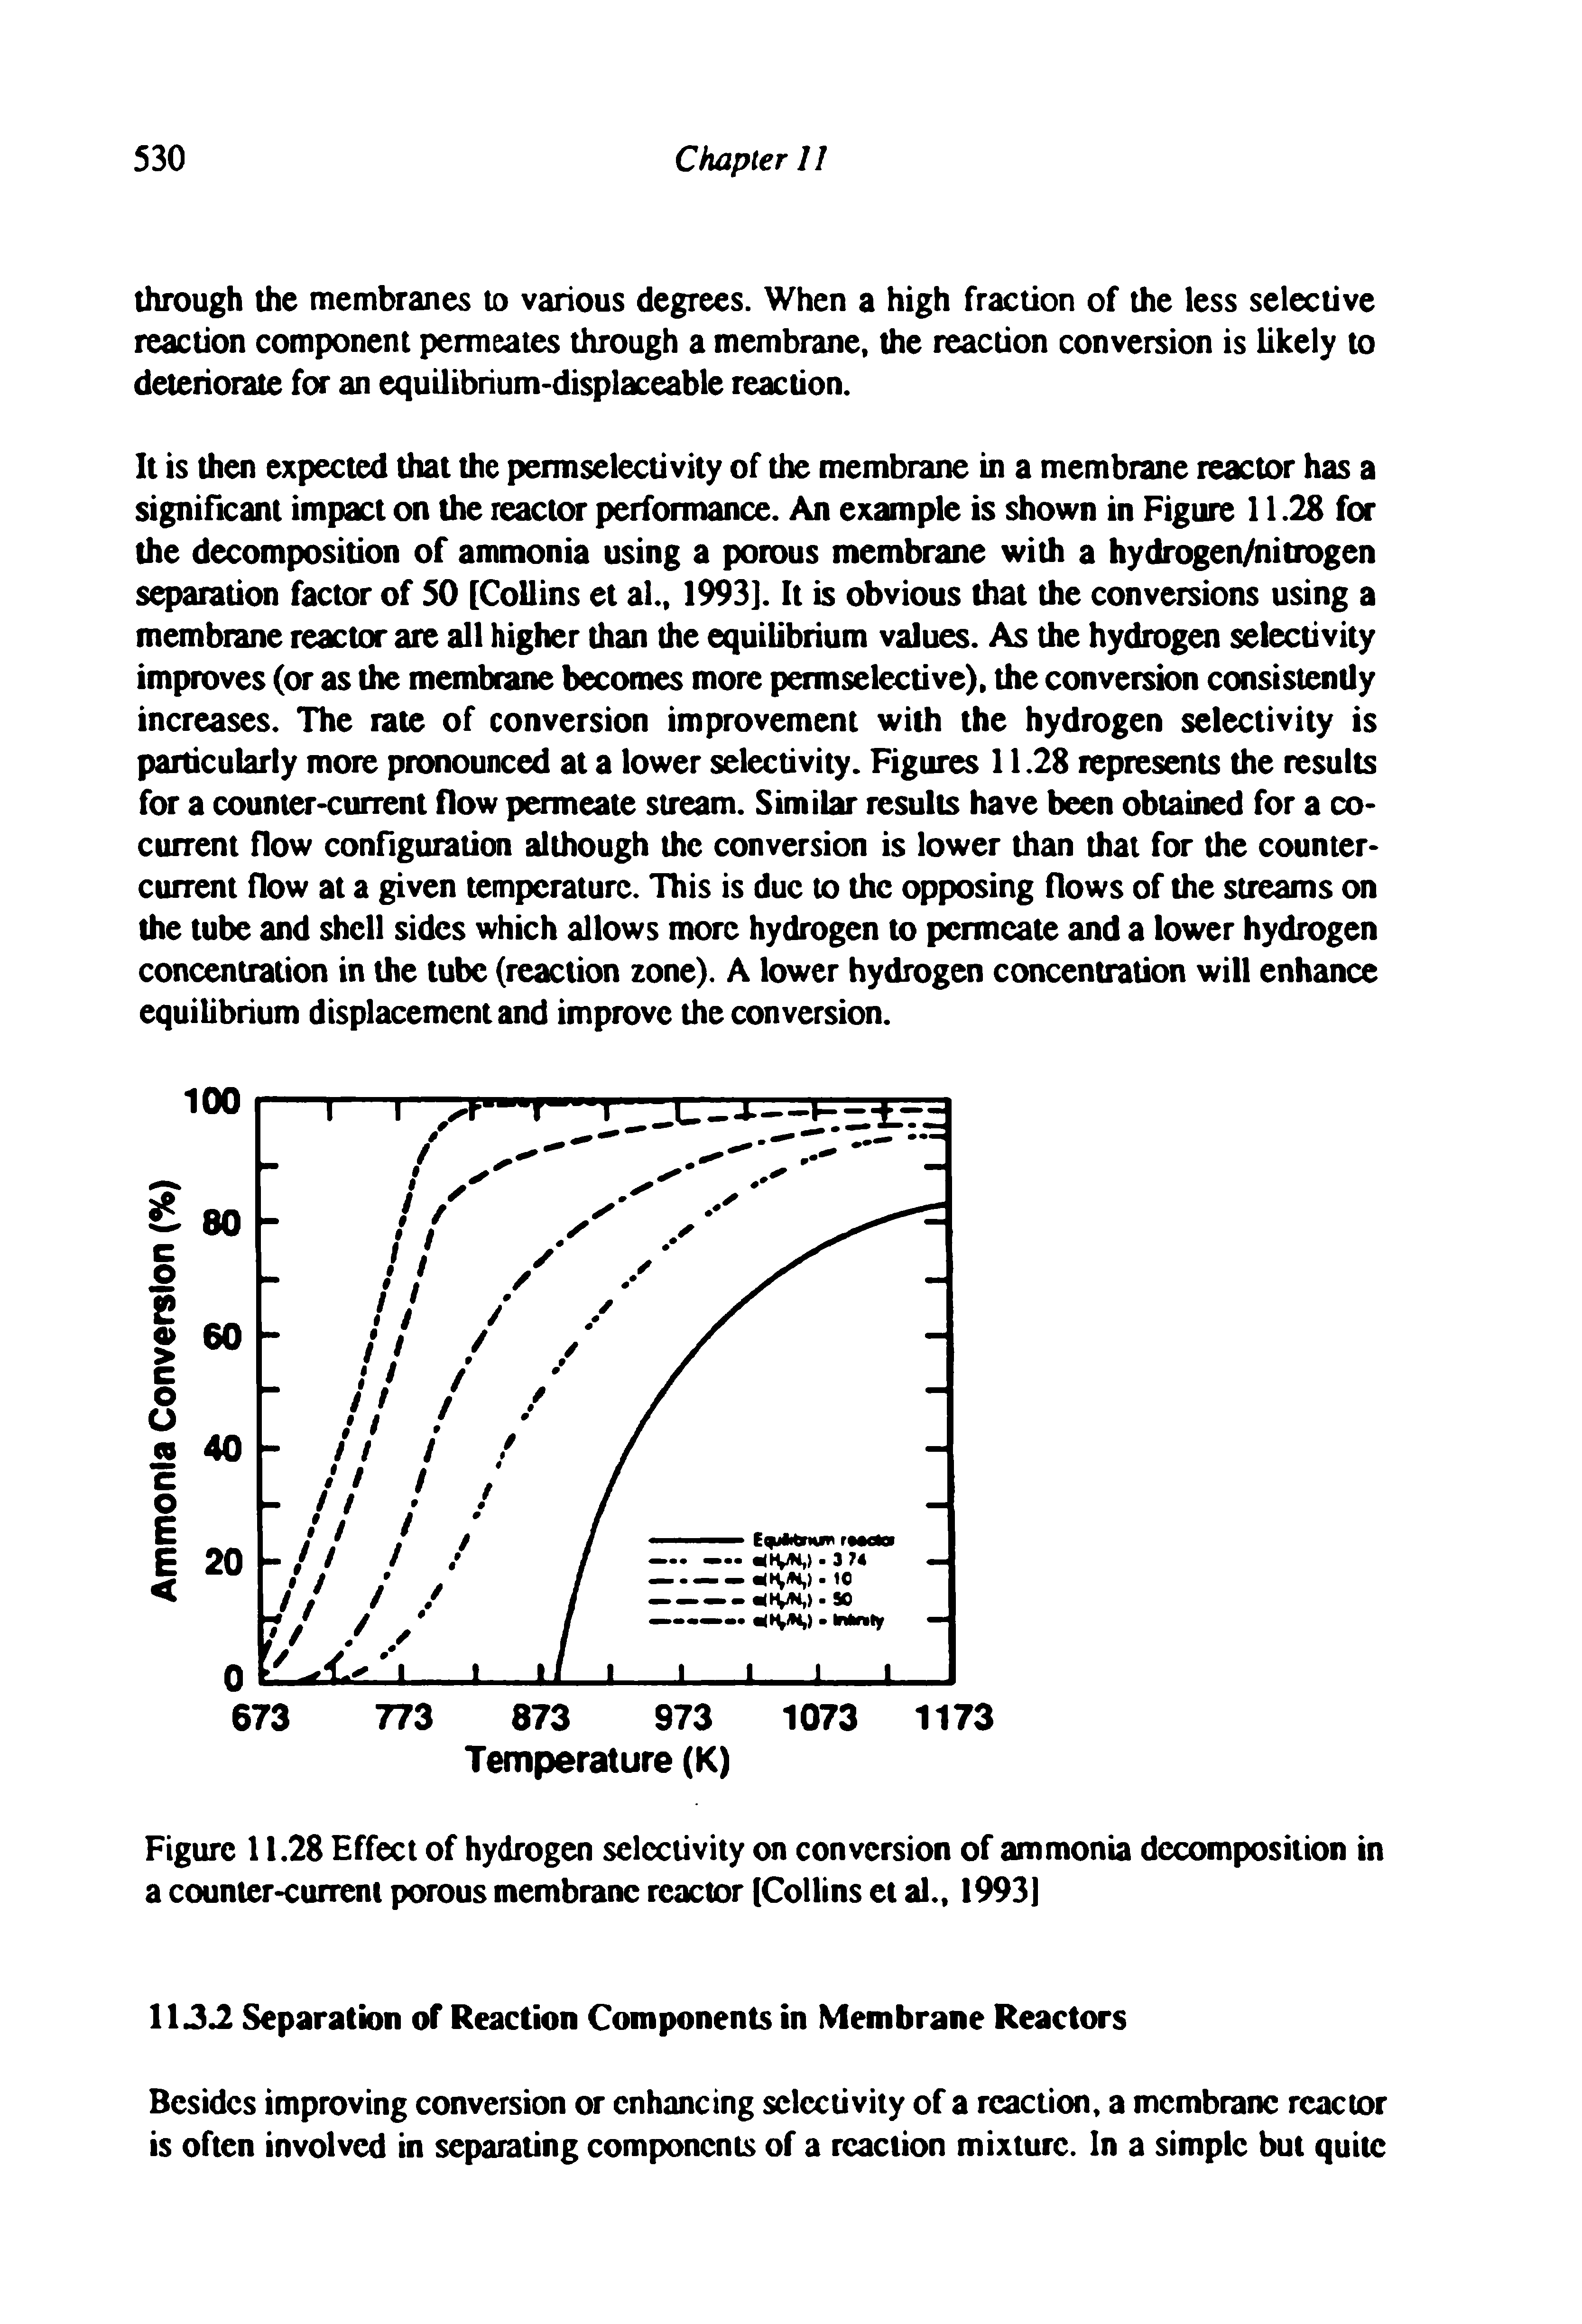 Figure 11.28 Effect of hydrogen selectivity on conversion of ammonia decomposition in a counter-current porous membrane reactor (Collins et al.. 1993]...